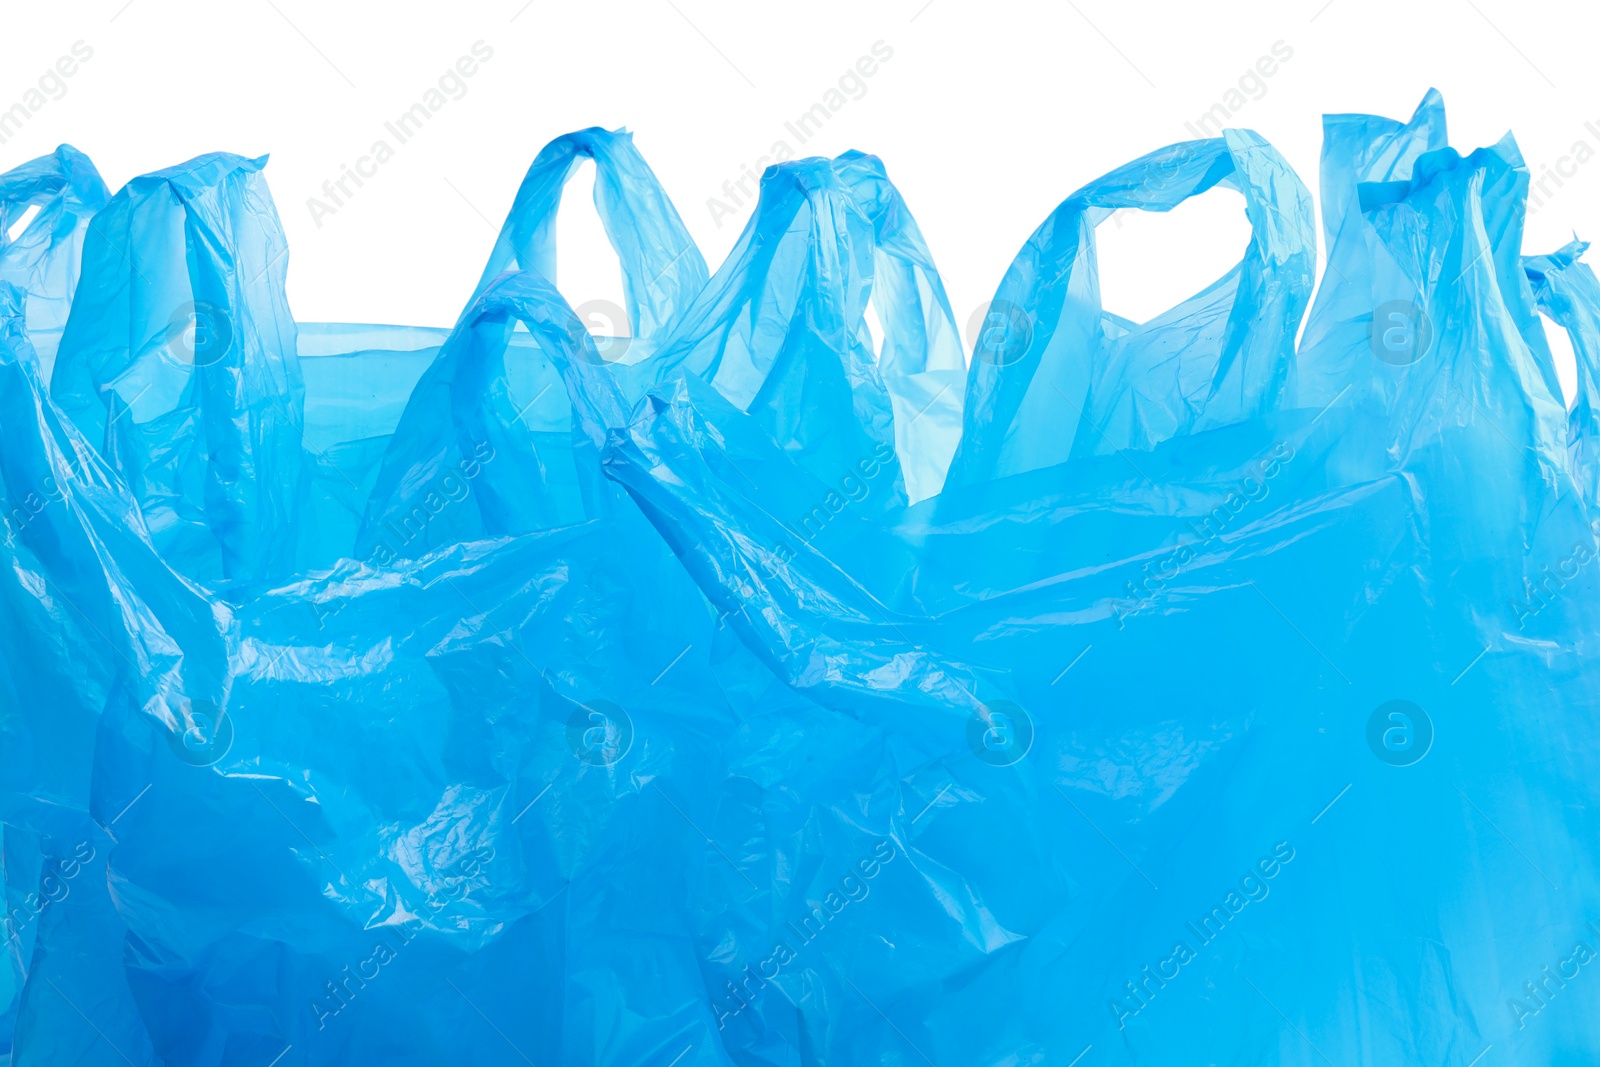 Photo of Many light blue plastic bags isolated on white